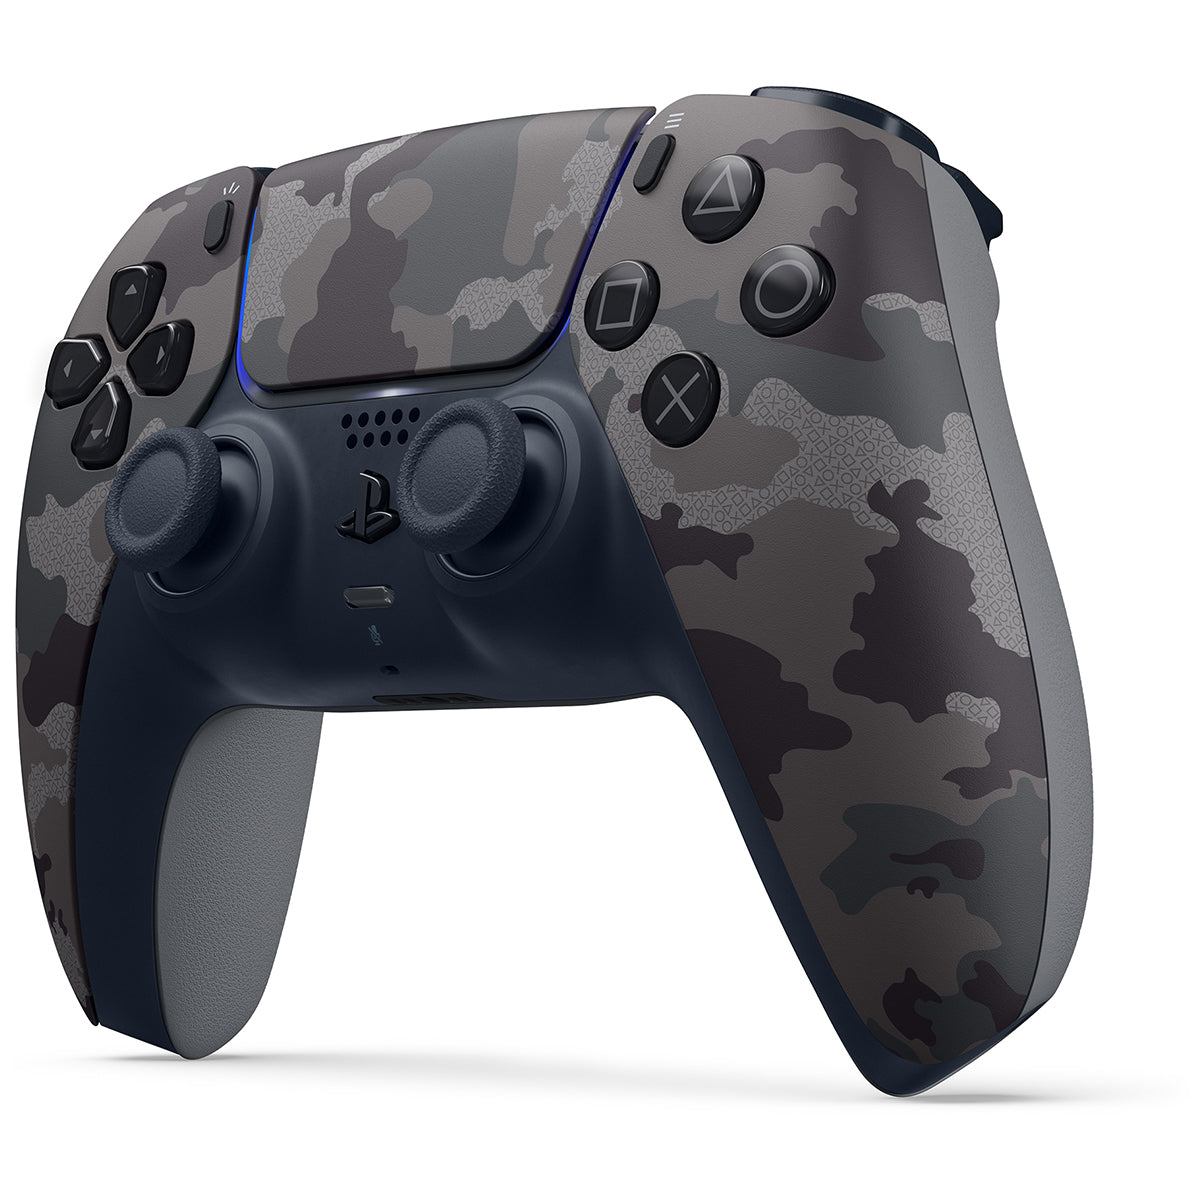 Sony Playstation 5 Disc Edition with Extra Gray Camo Controller and QuickType 2.0 Controller Keypad Bundle - Pro-Distributing